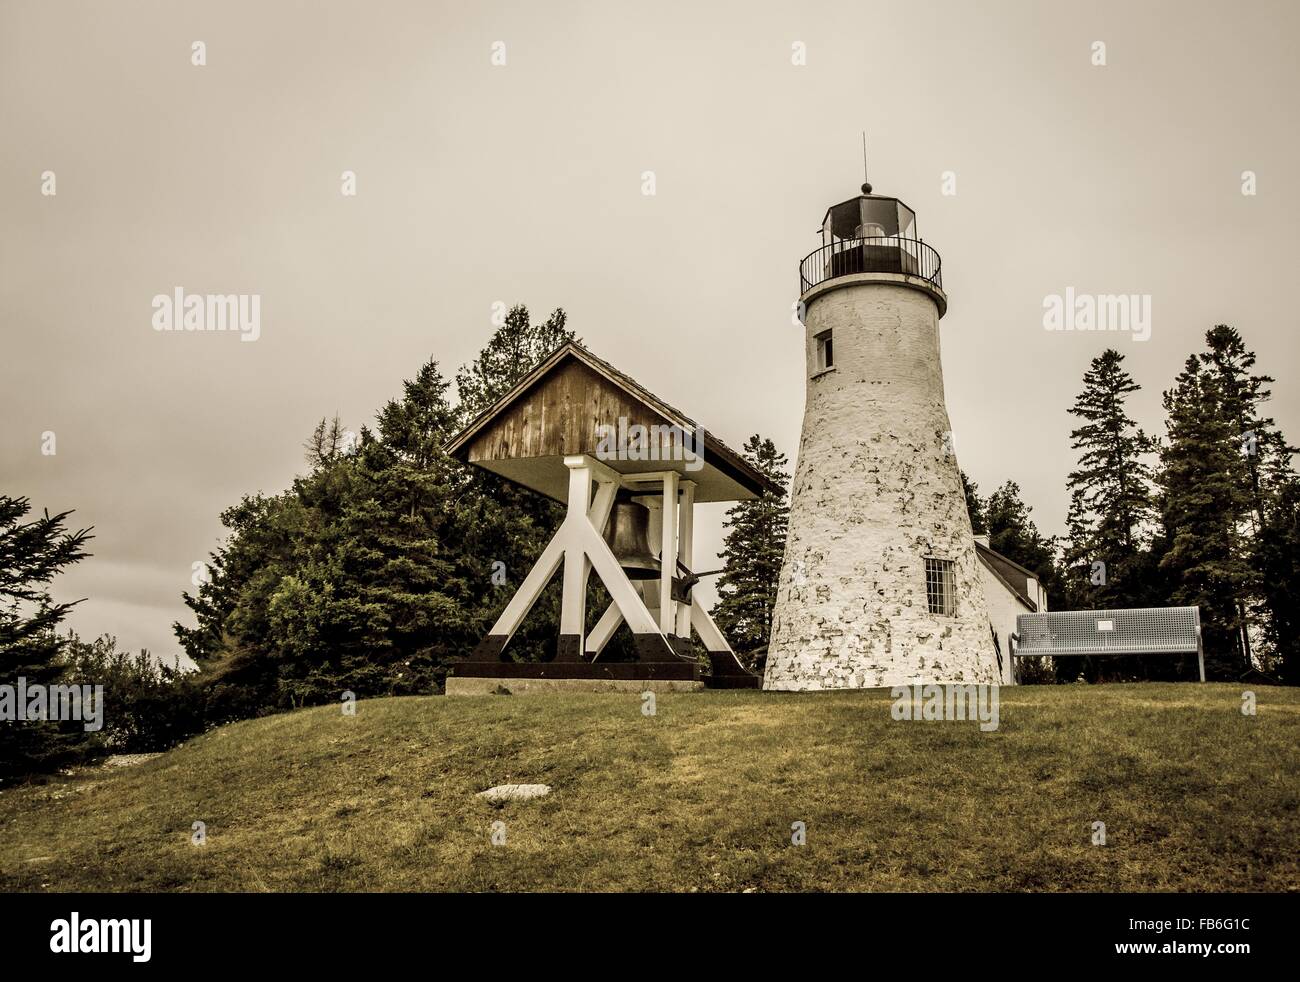 Old Presque Isle Lighthouse. The old Presque Isle Lighthouse on Lake Huron. The lighthouse is supposedly haunted. Stock Photo